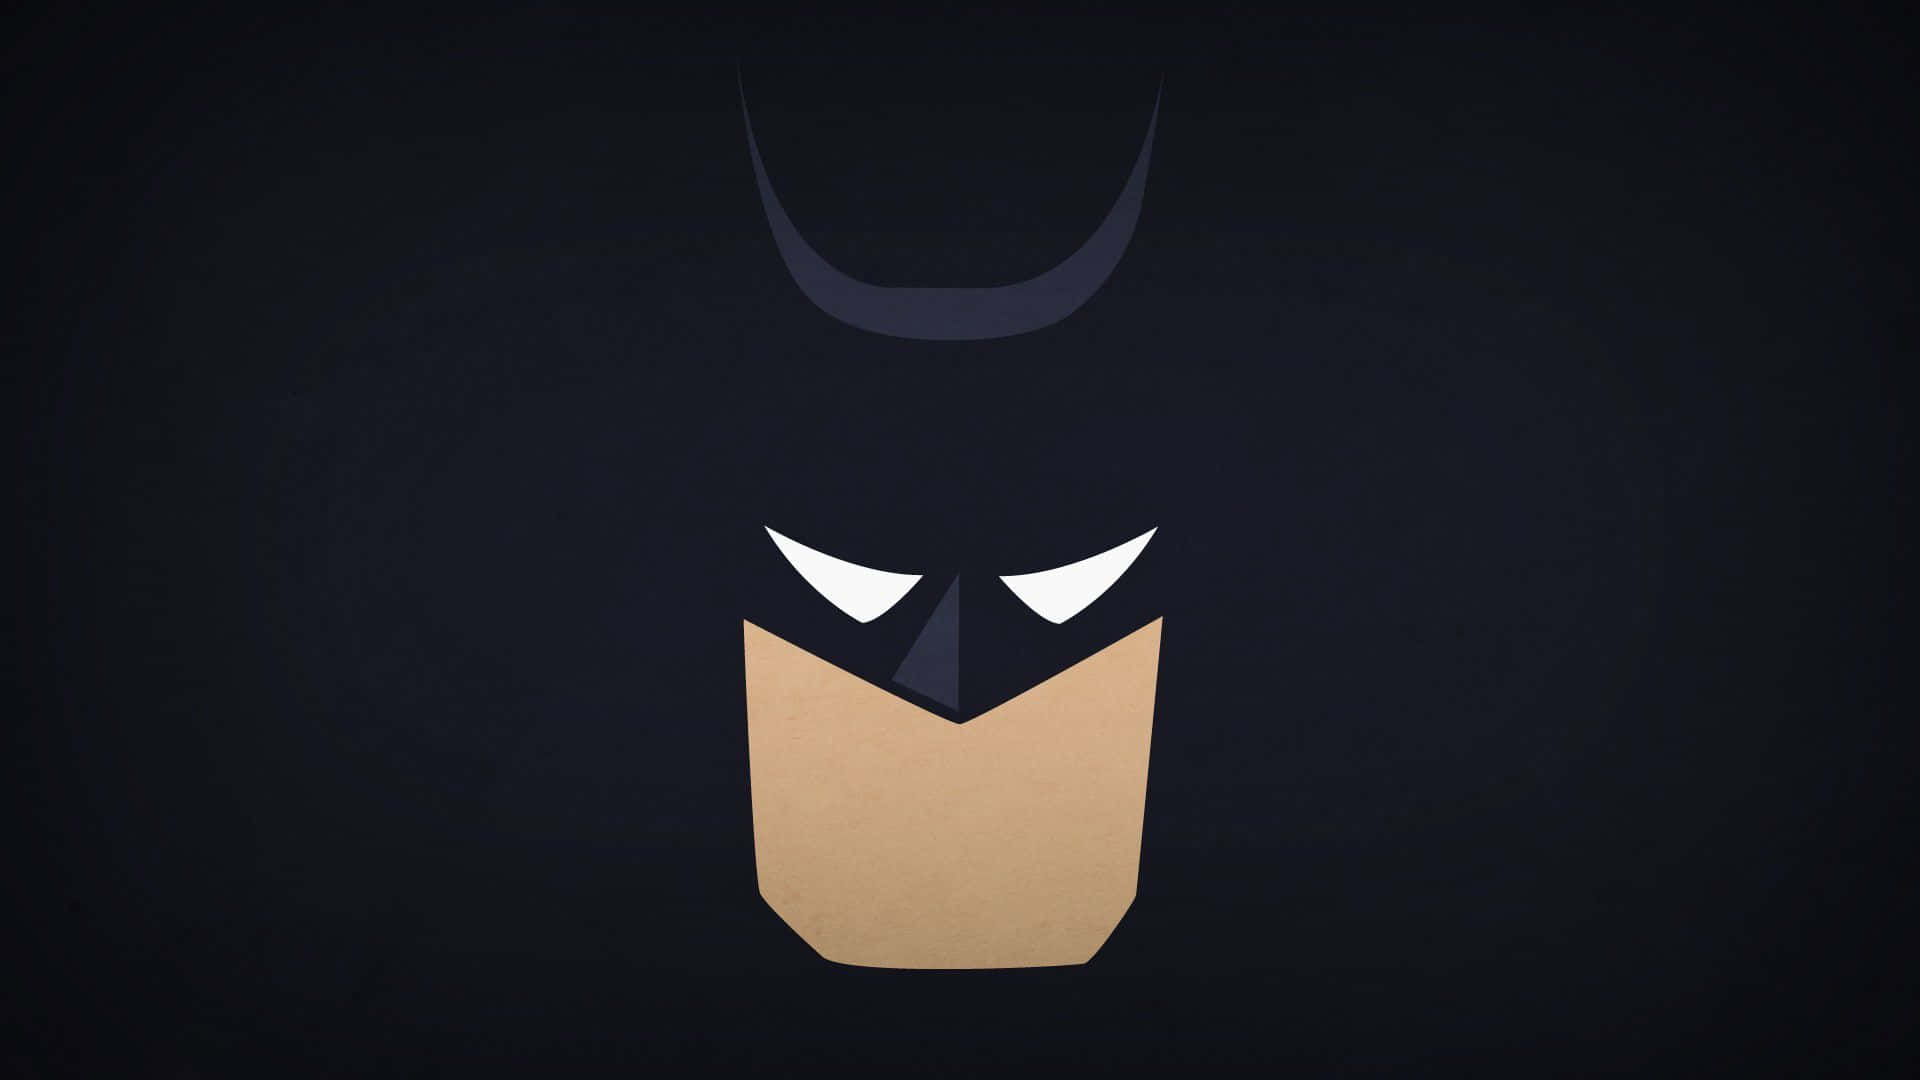 Batman shows off his signature stance and moves in the animated cartoon. Wallpaper